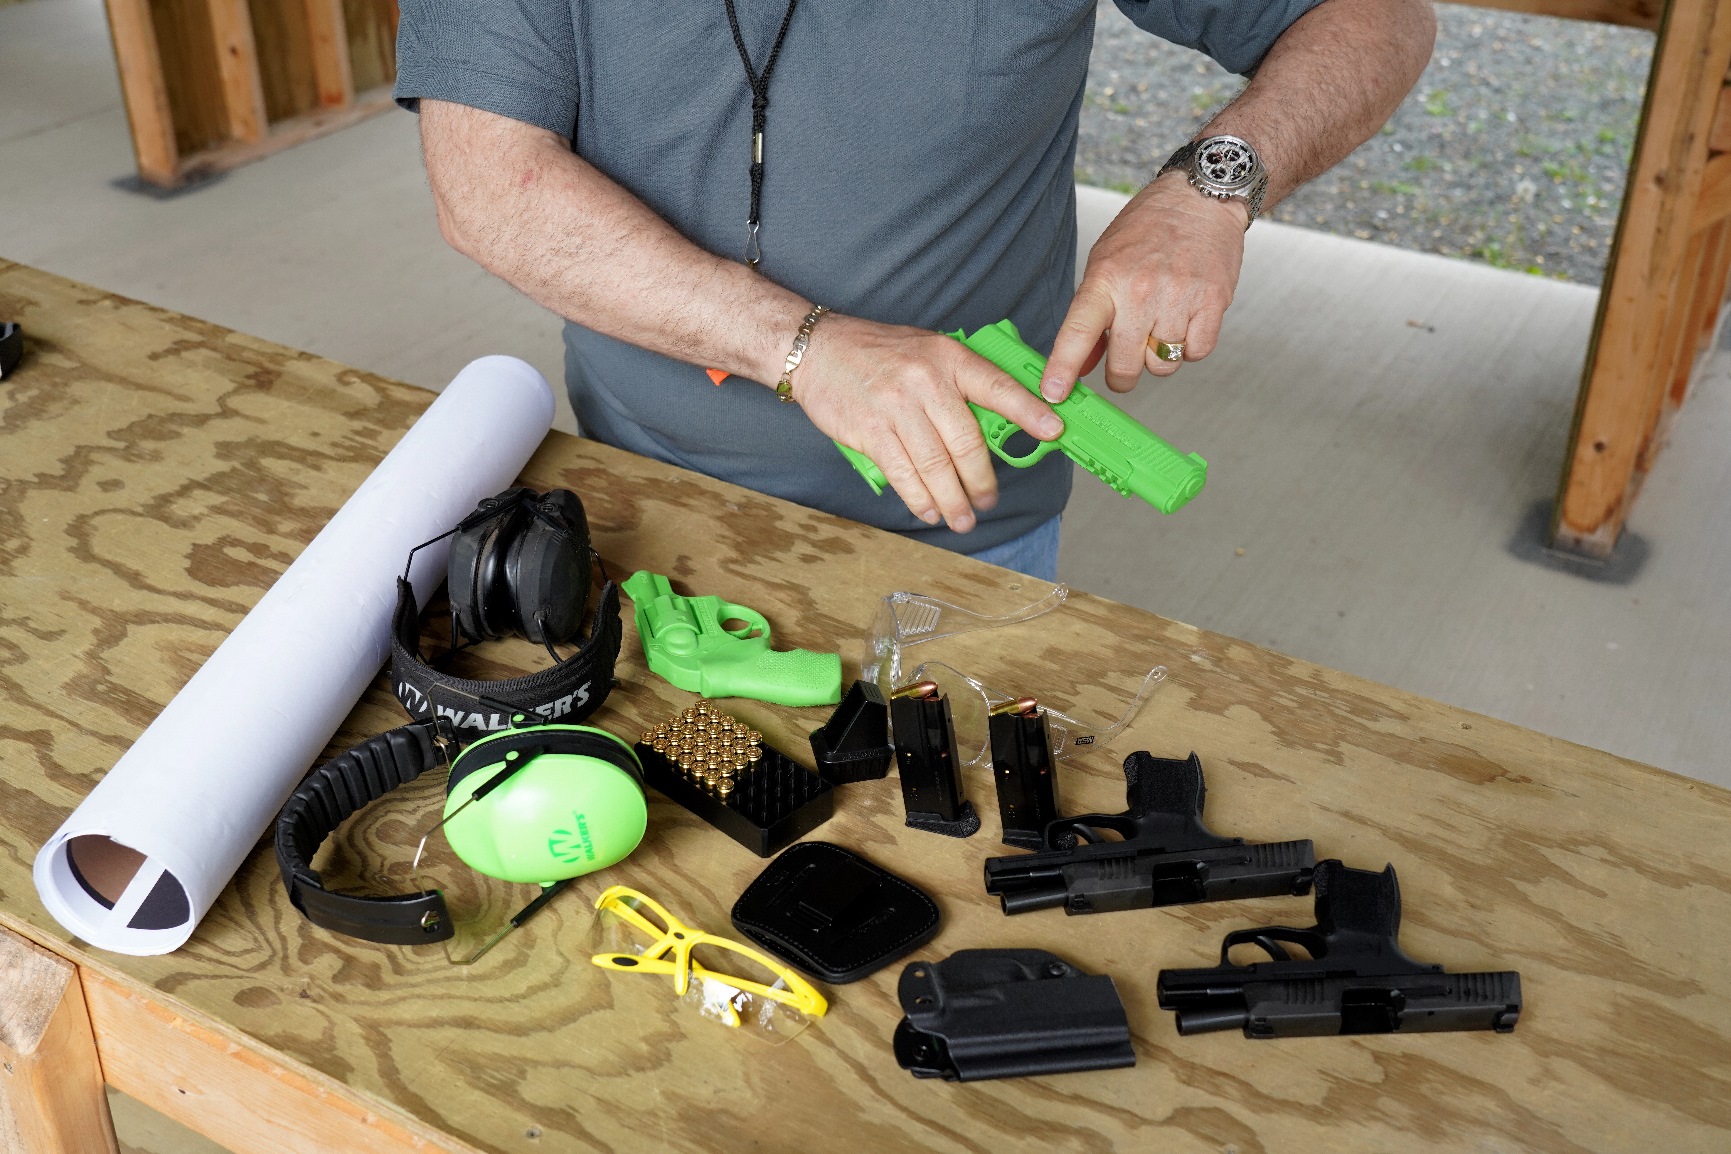 Man pointing at gun with gun accessories on a table in front of him